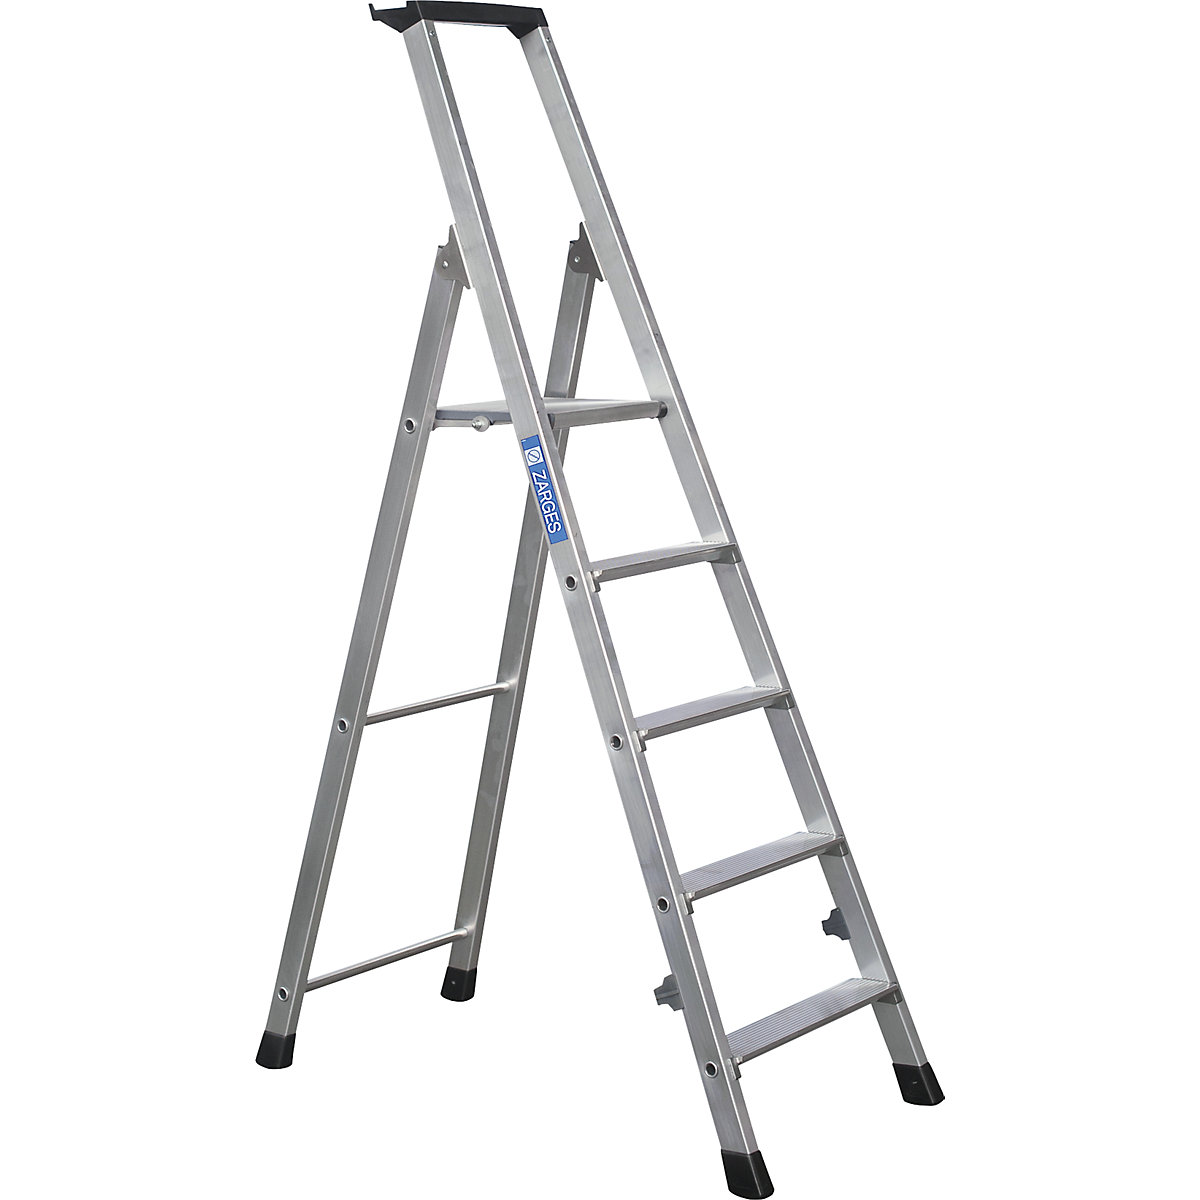 Folding step ladder, single sided access – ZARGES, with storage tray, for light use, 5 steps incl. platform-4